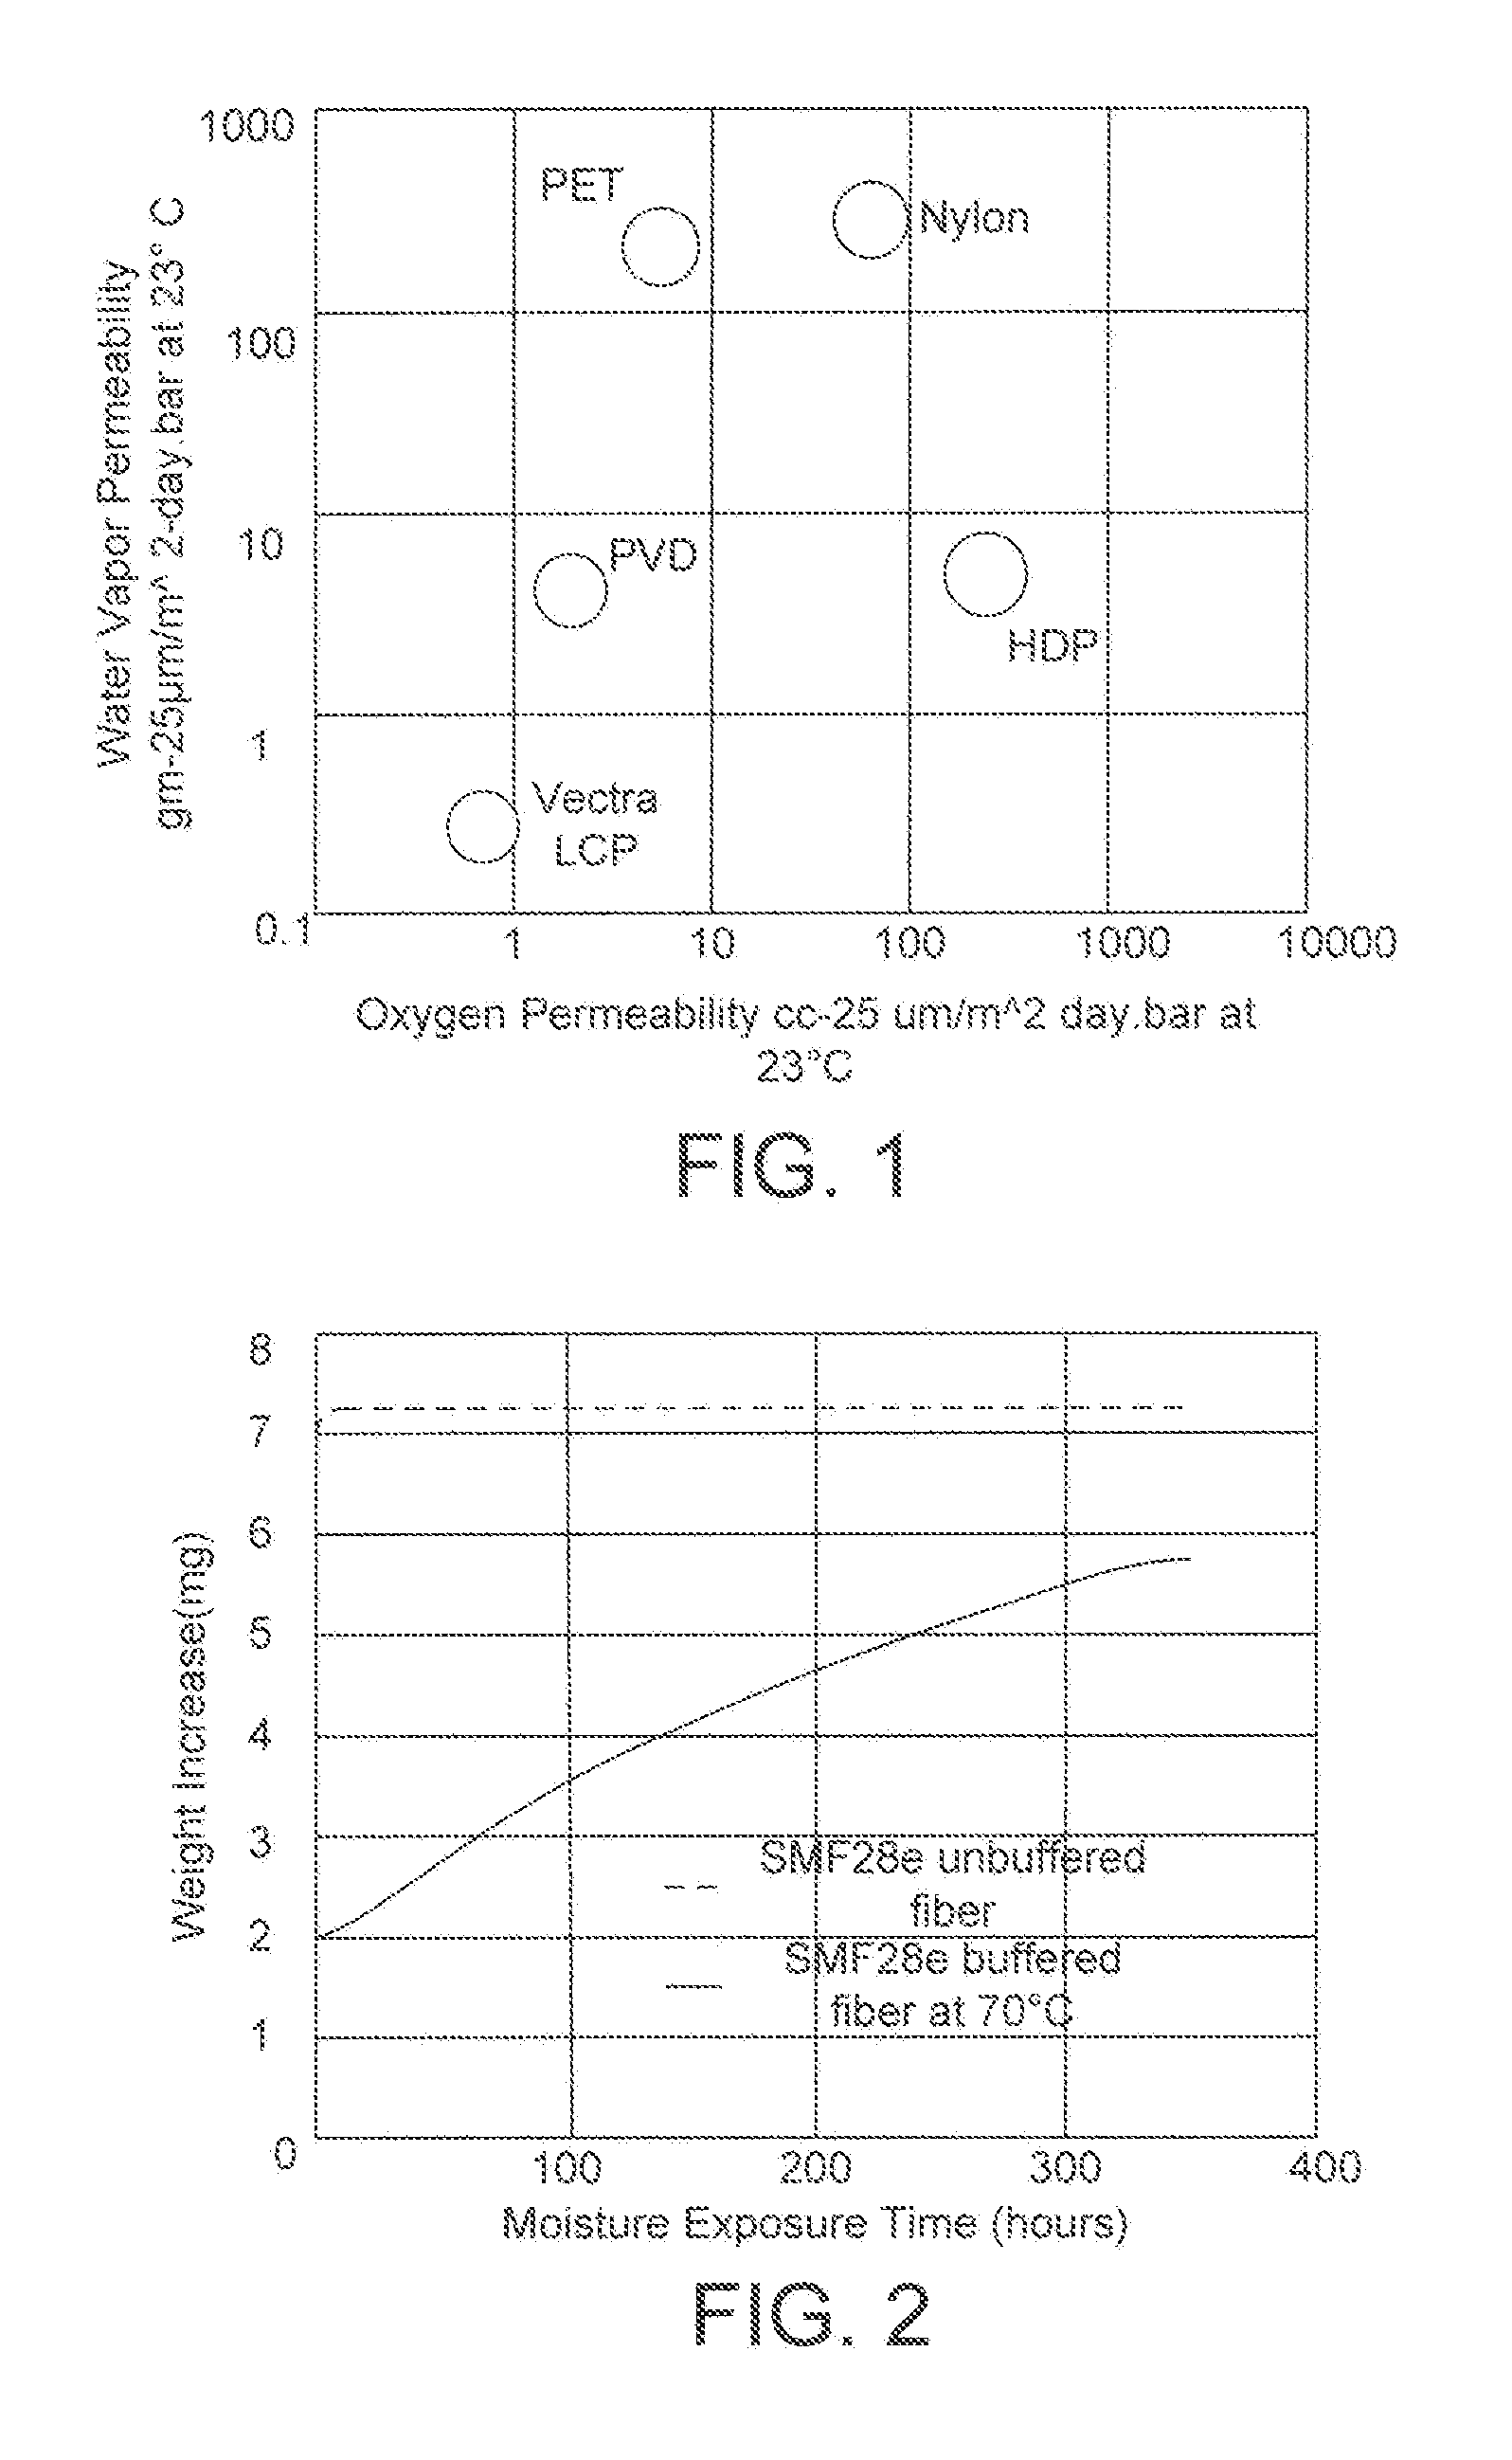 Hermetic electrical ports in liquid crystal polymer packages